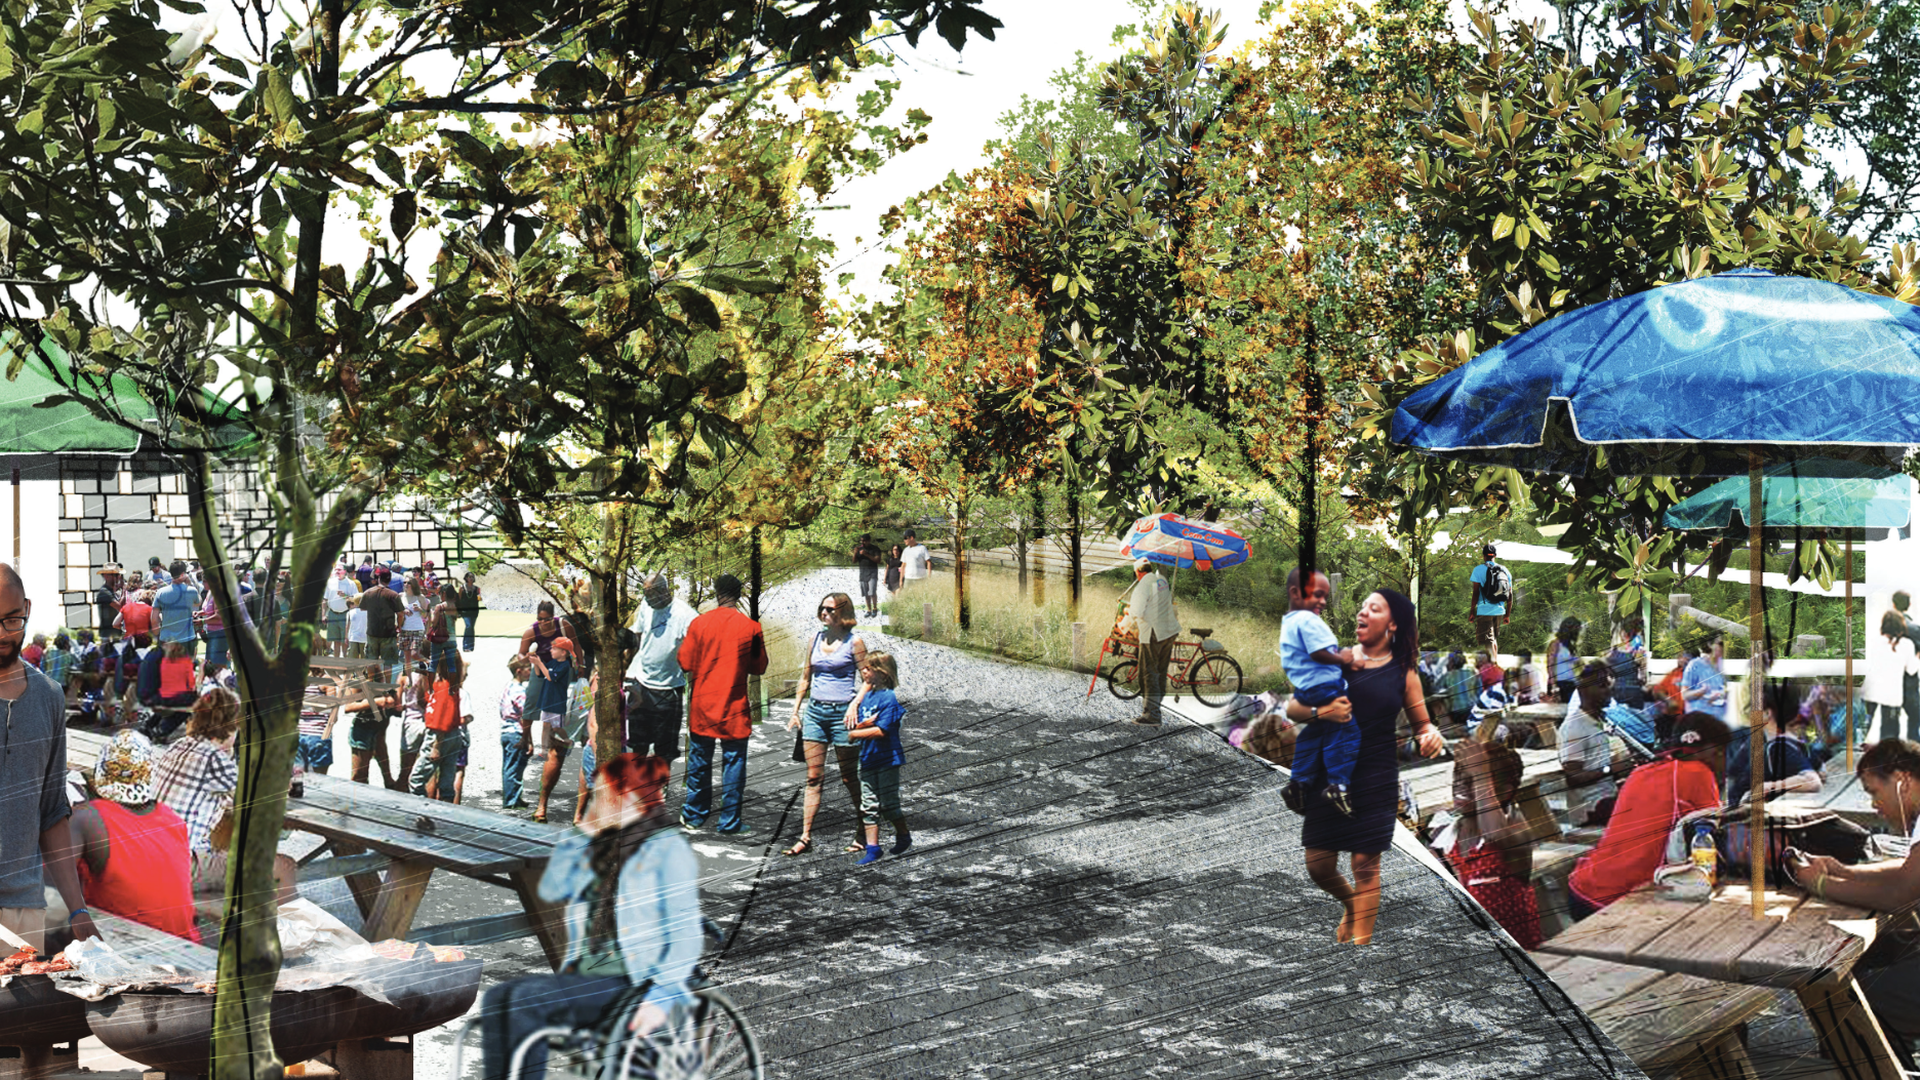 A rendering of the picnic grove at Gipson Play Plaza.